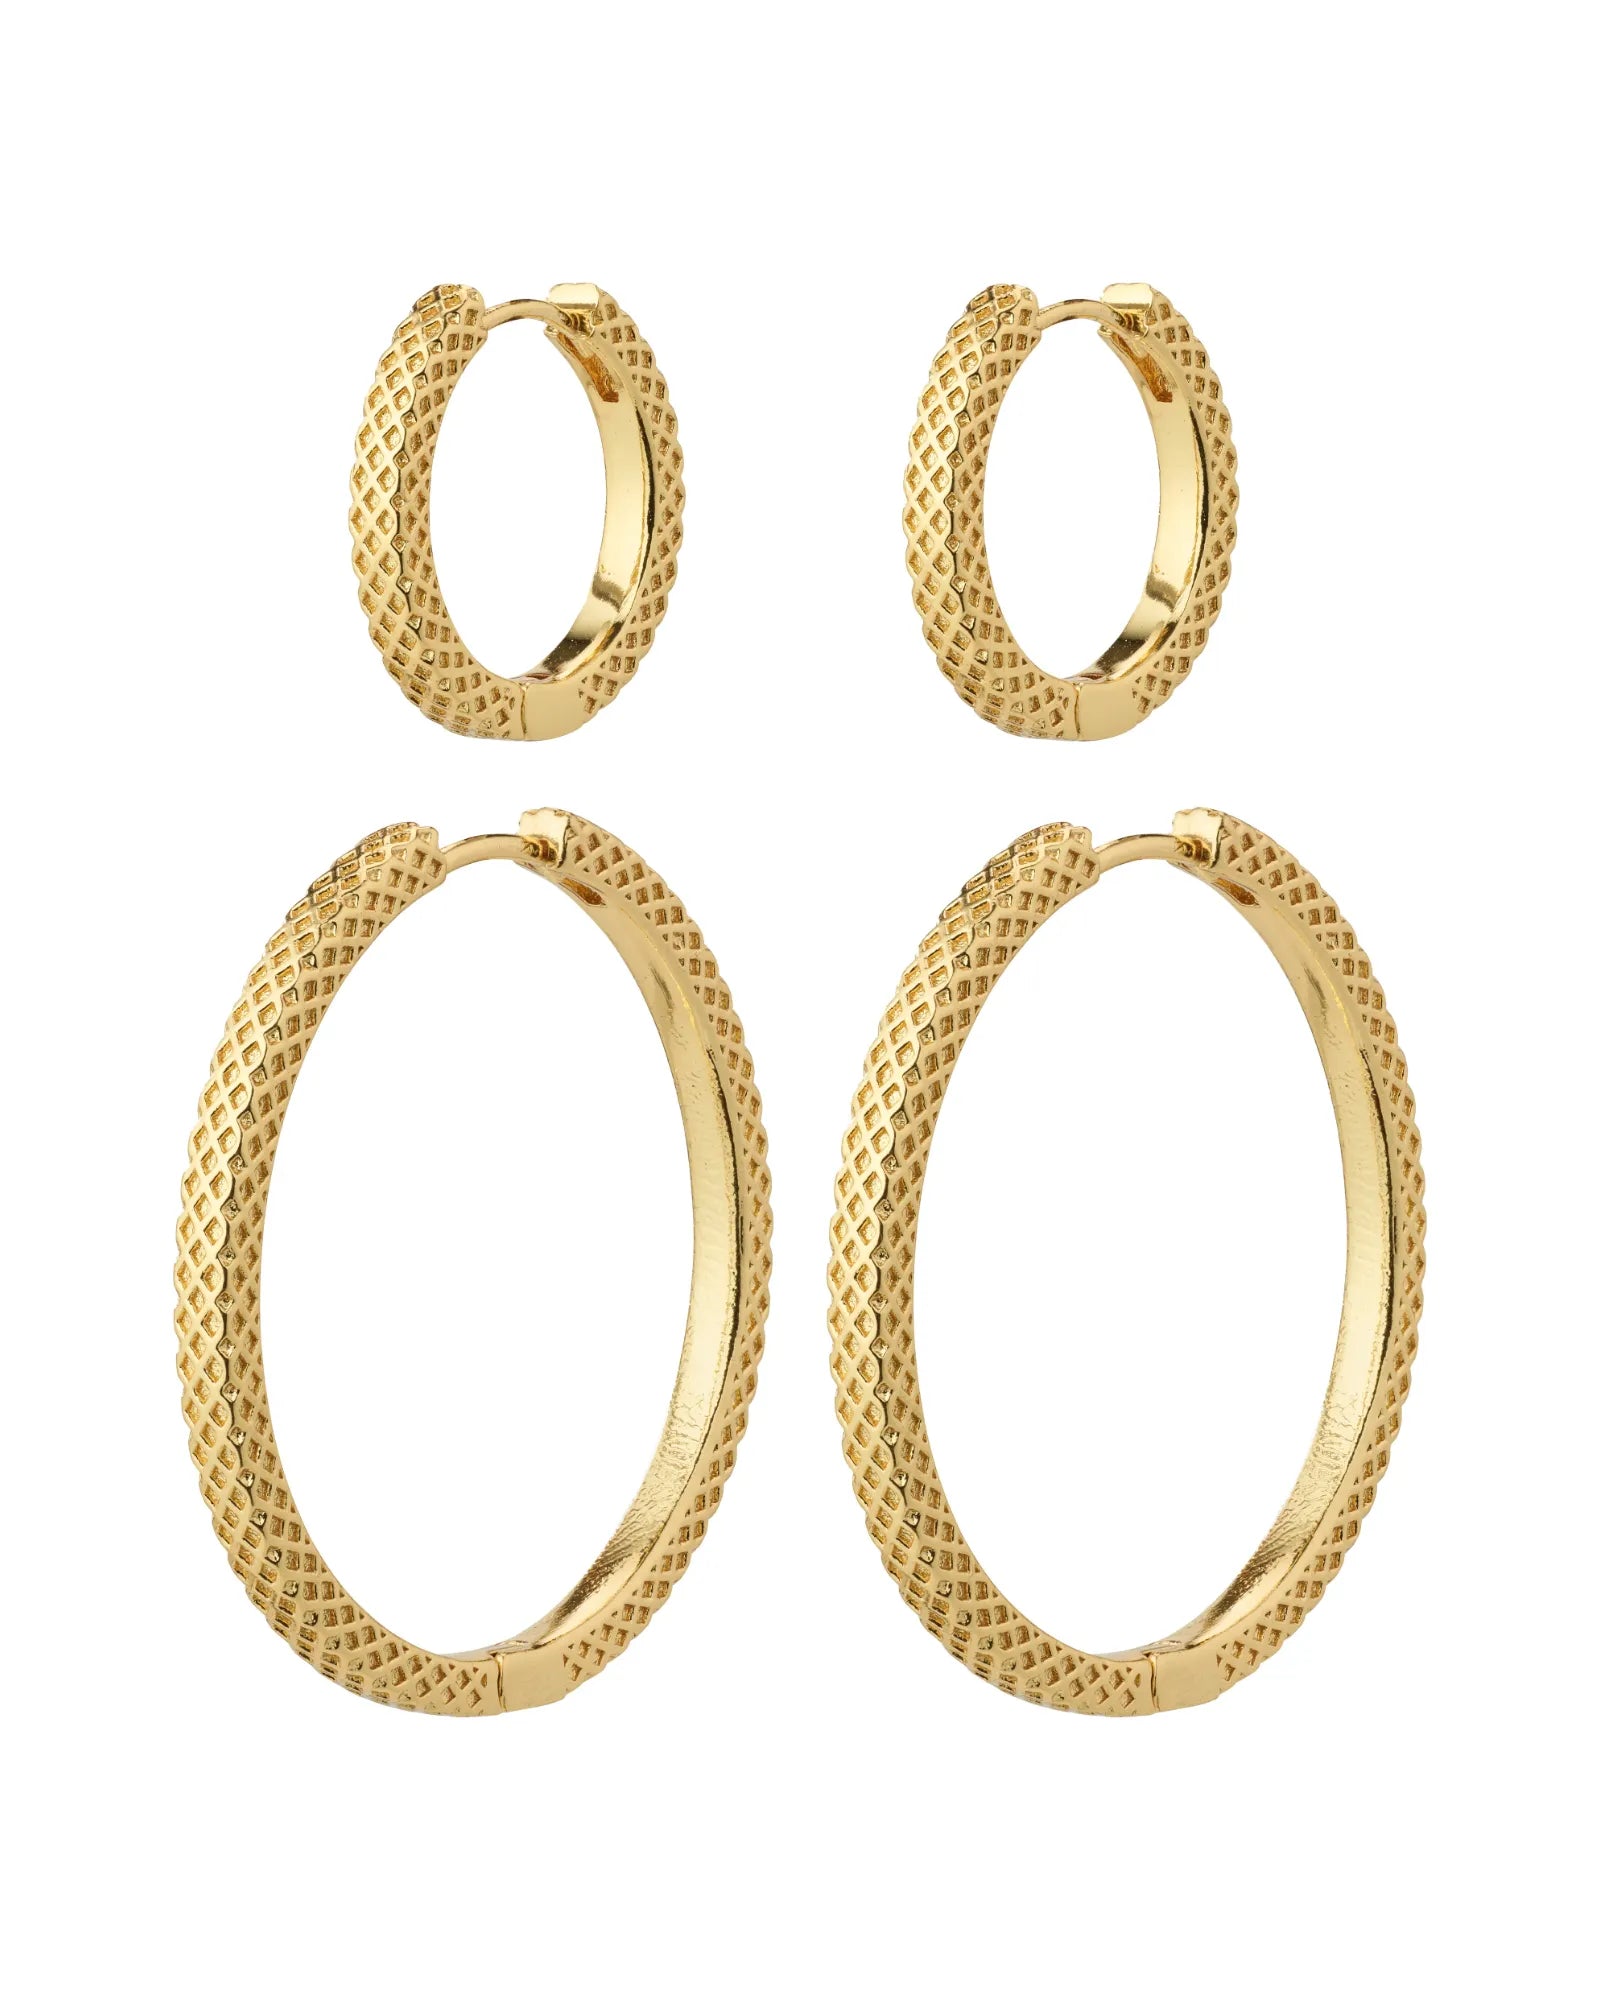 PULSE Recycled Earrings 2-in-1 Set - Gold Plated